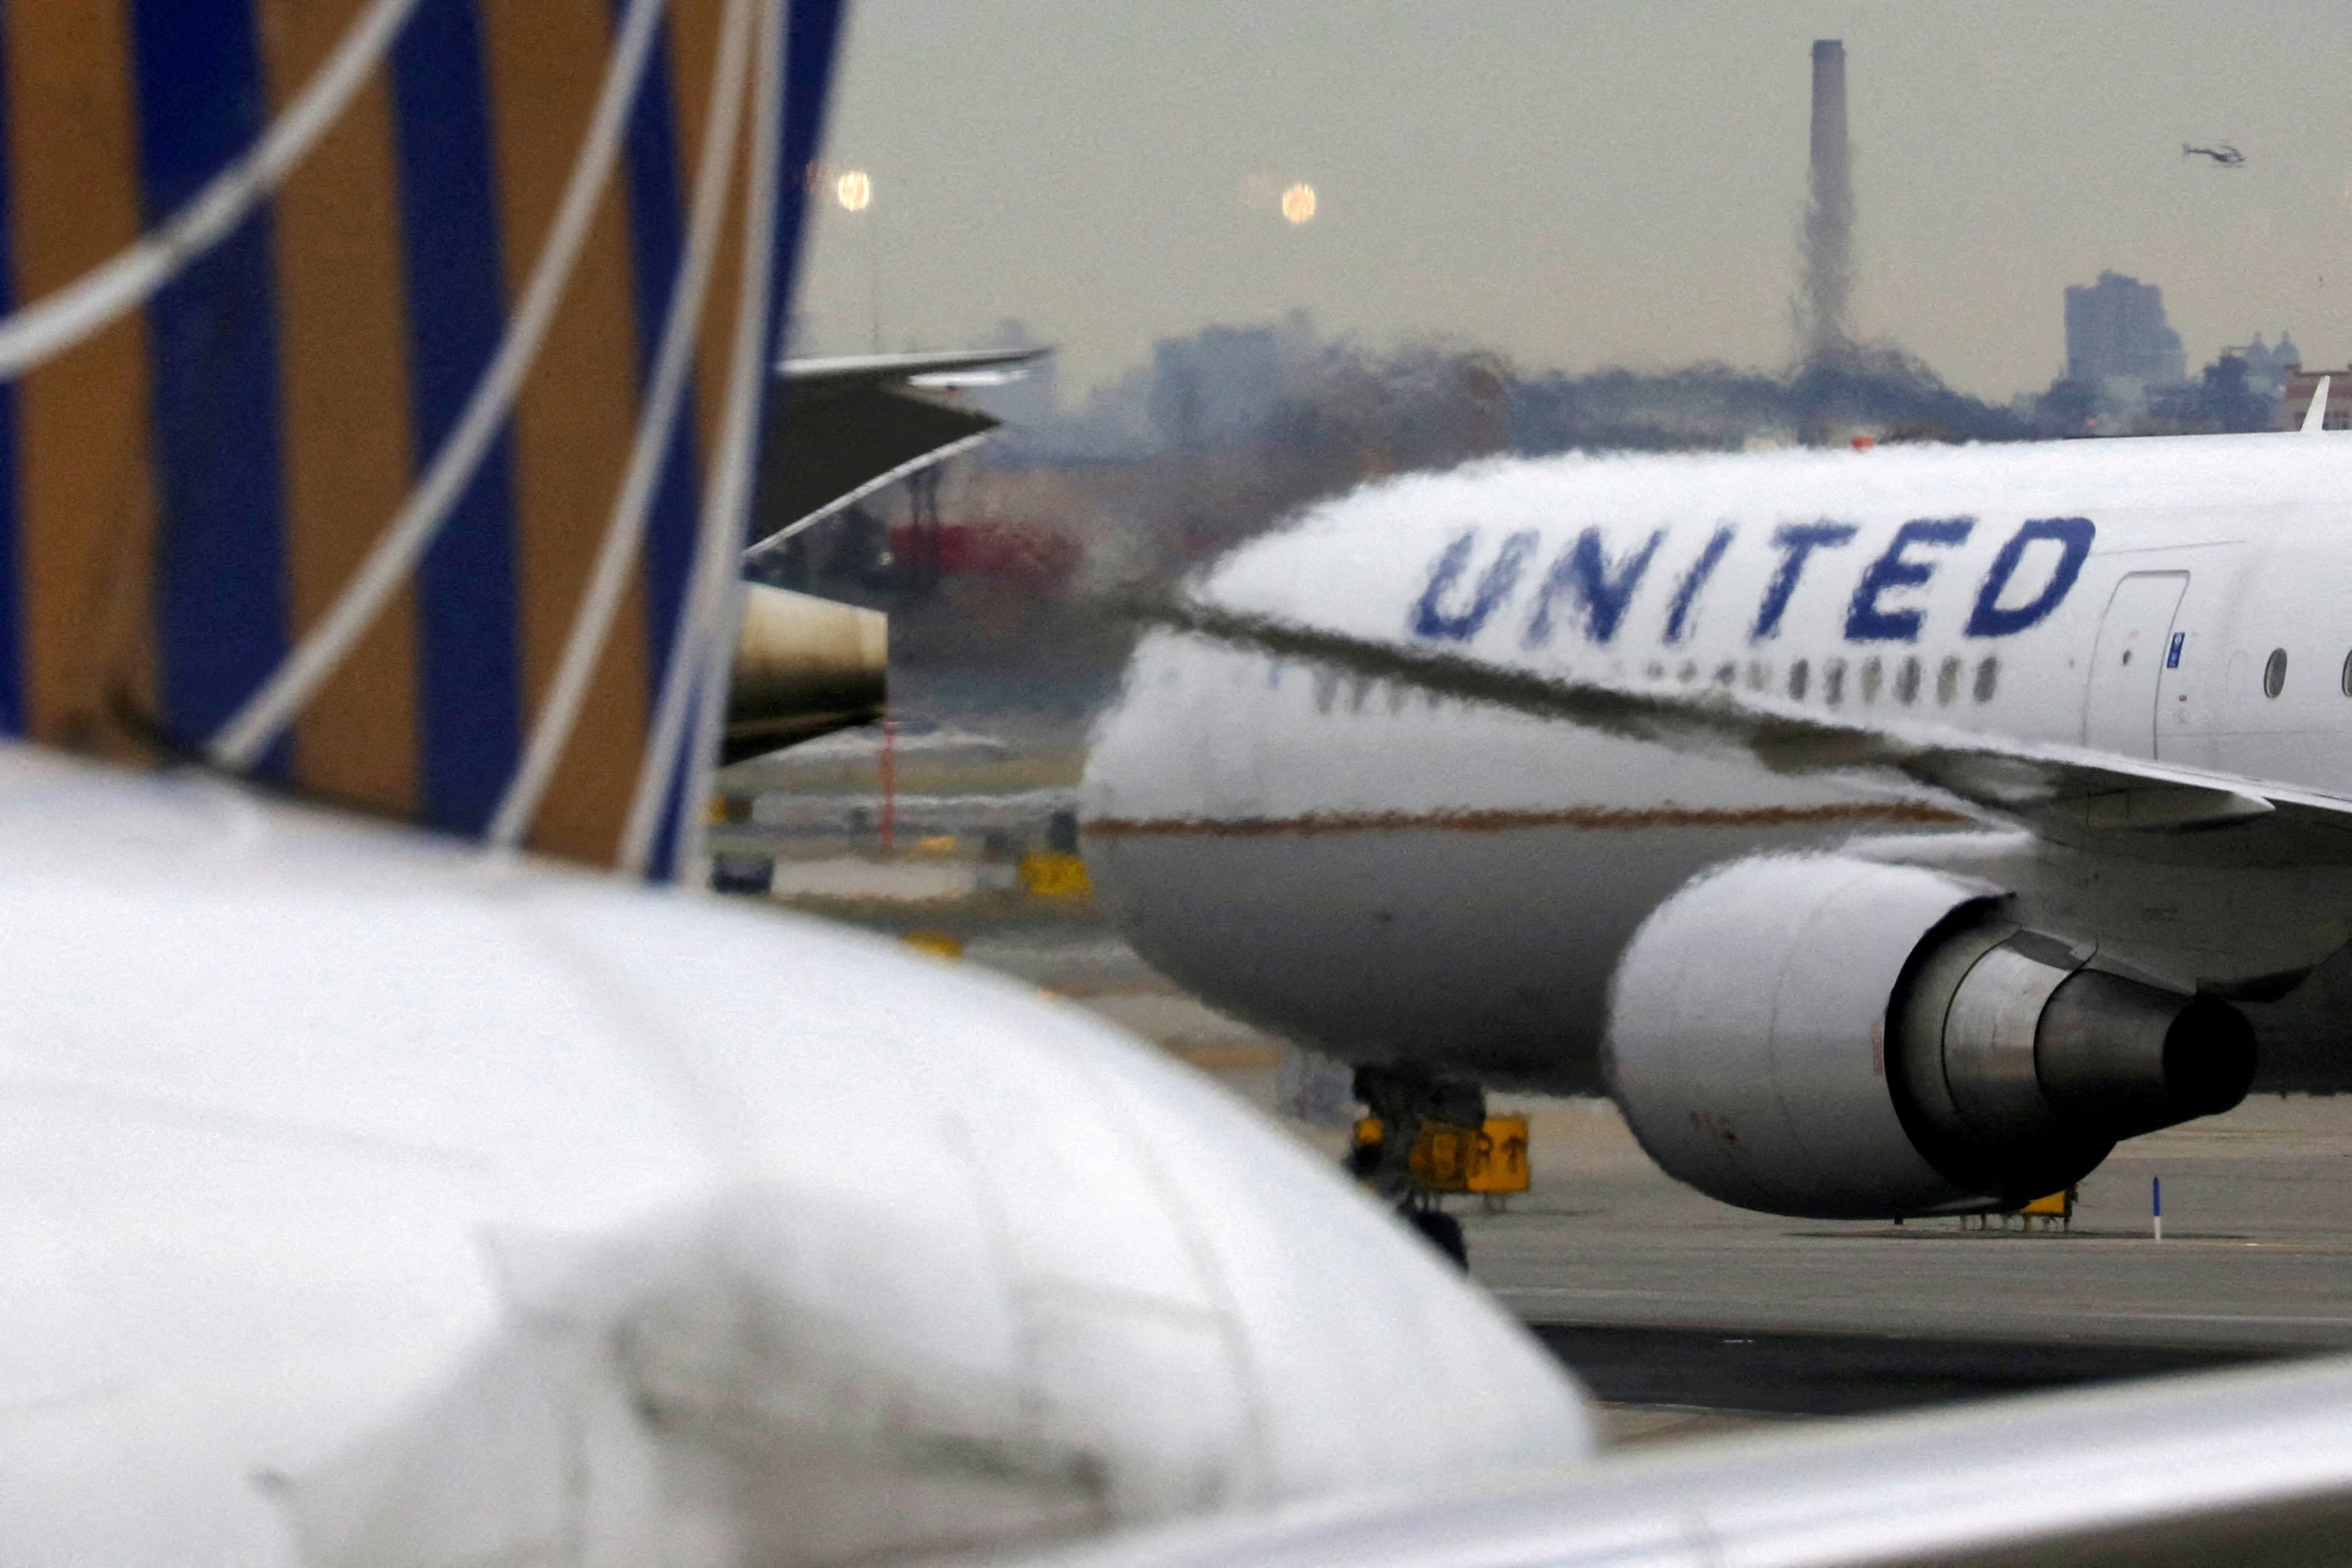 A United Airlines passenger jet taxis at Newark Liberty International Airport, New Jersey, U.S.